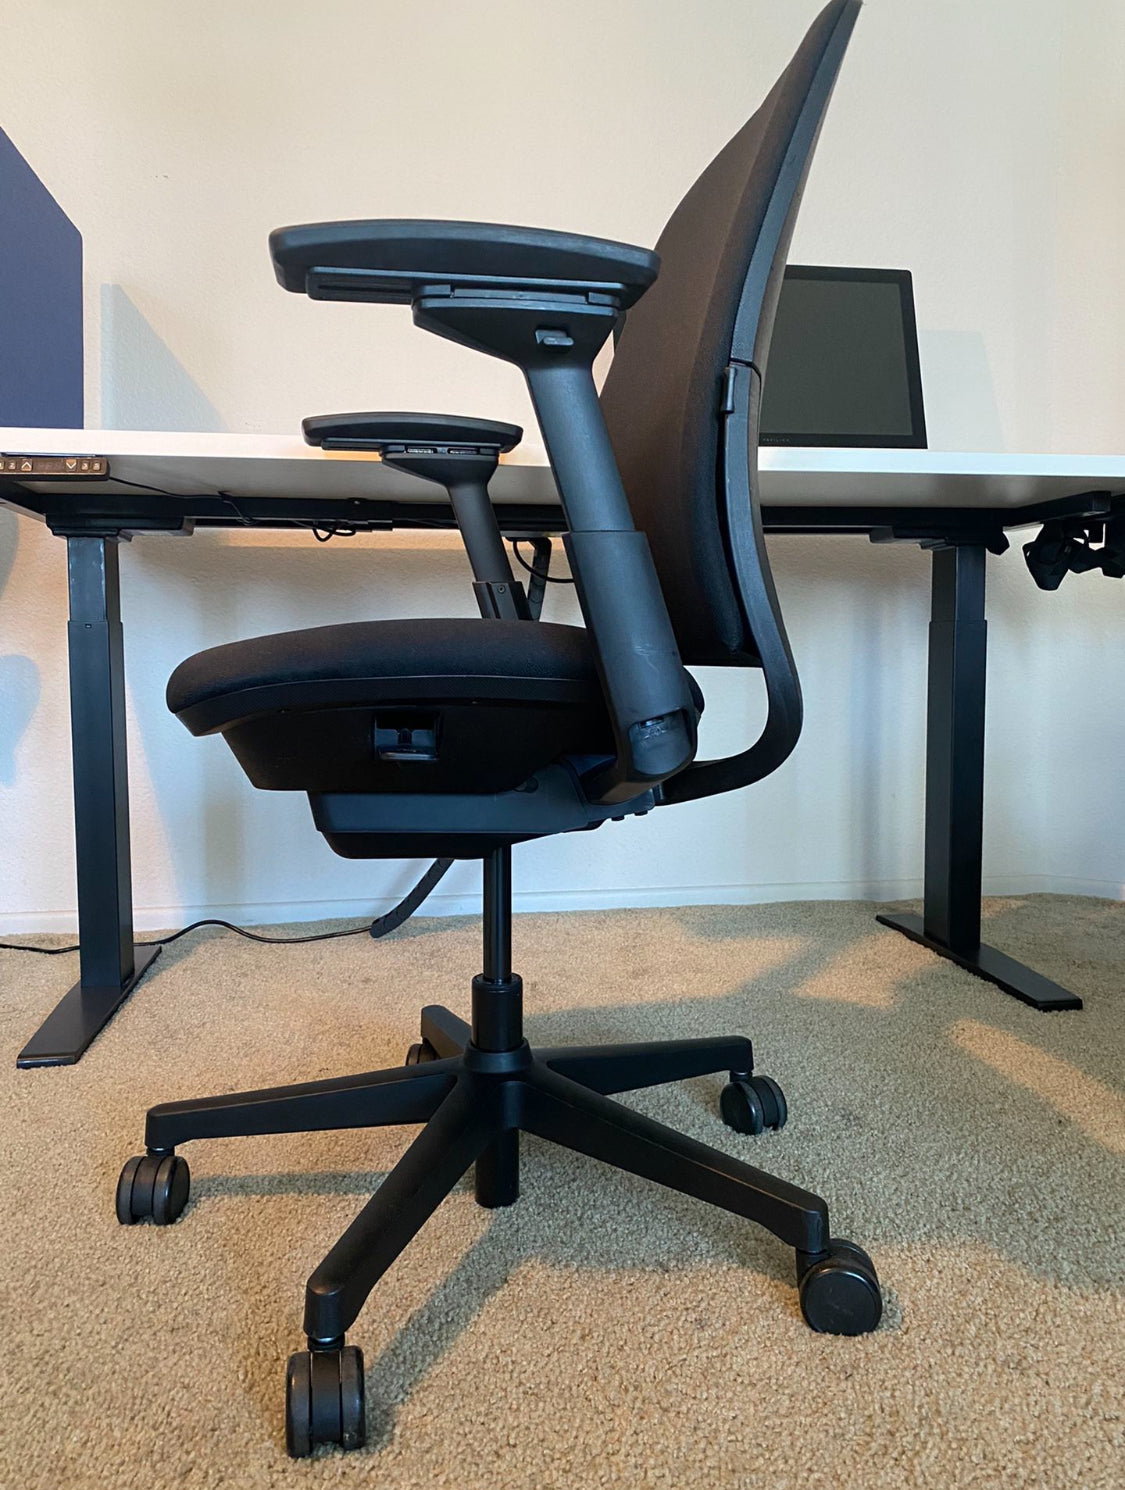 Steelcase Amia pre owned fully adjustable model in black